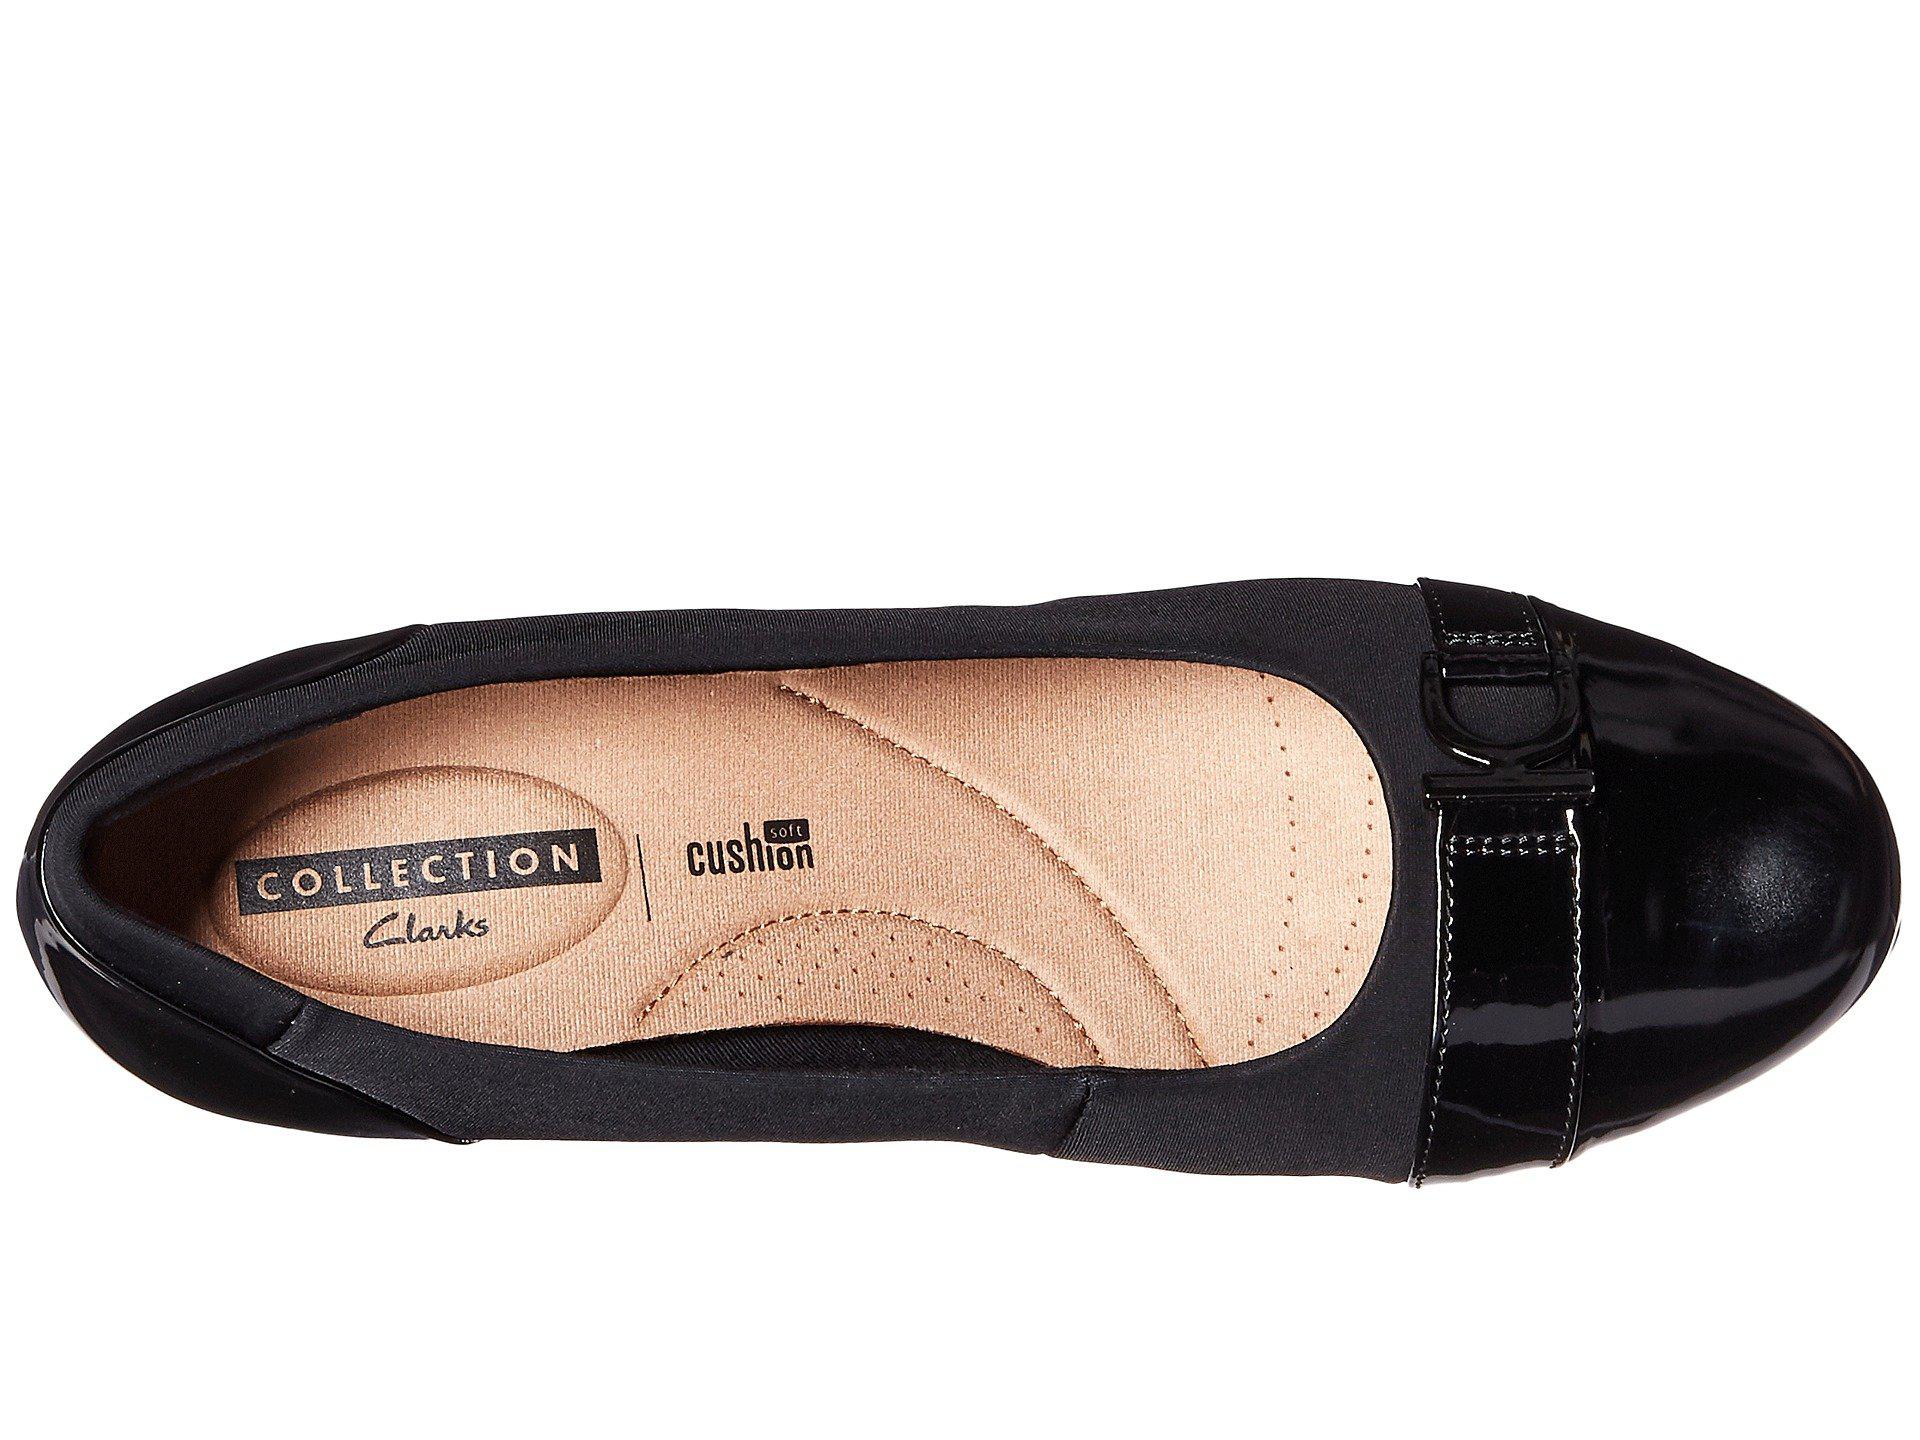 clarks collection cushion shoes